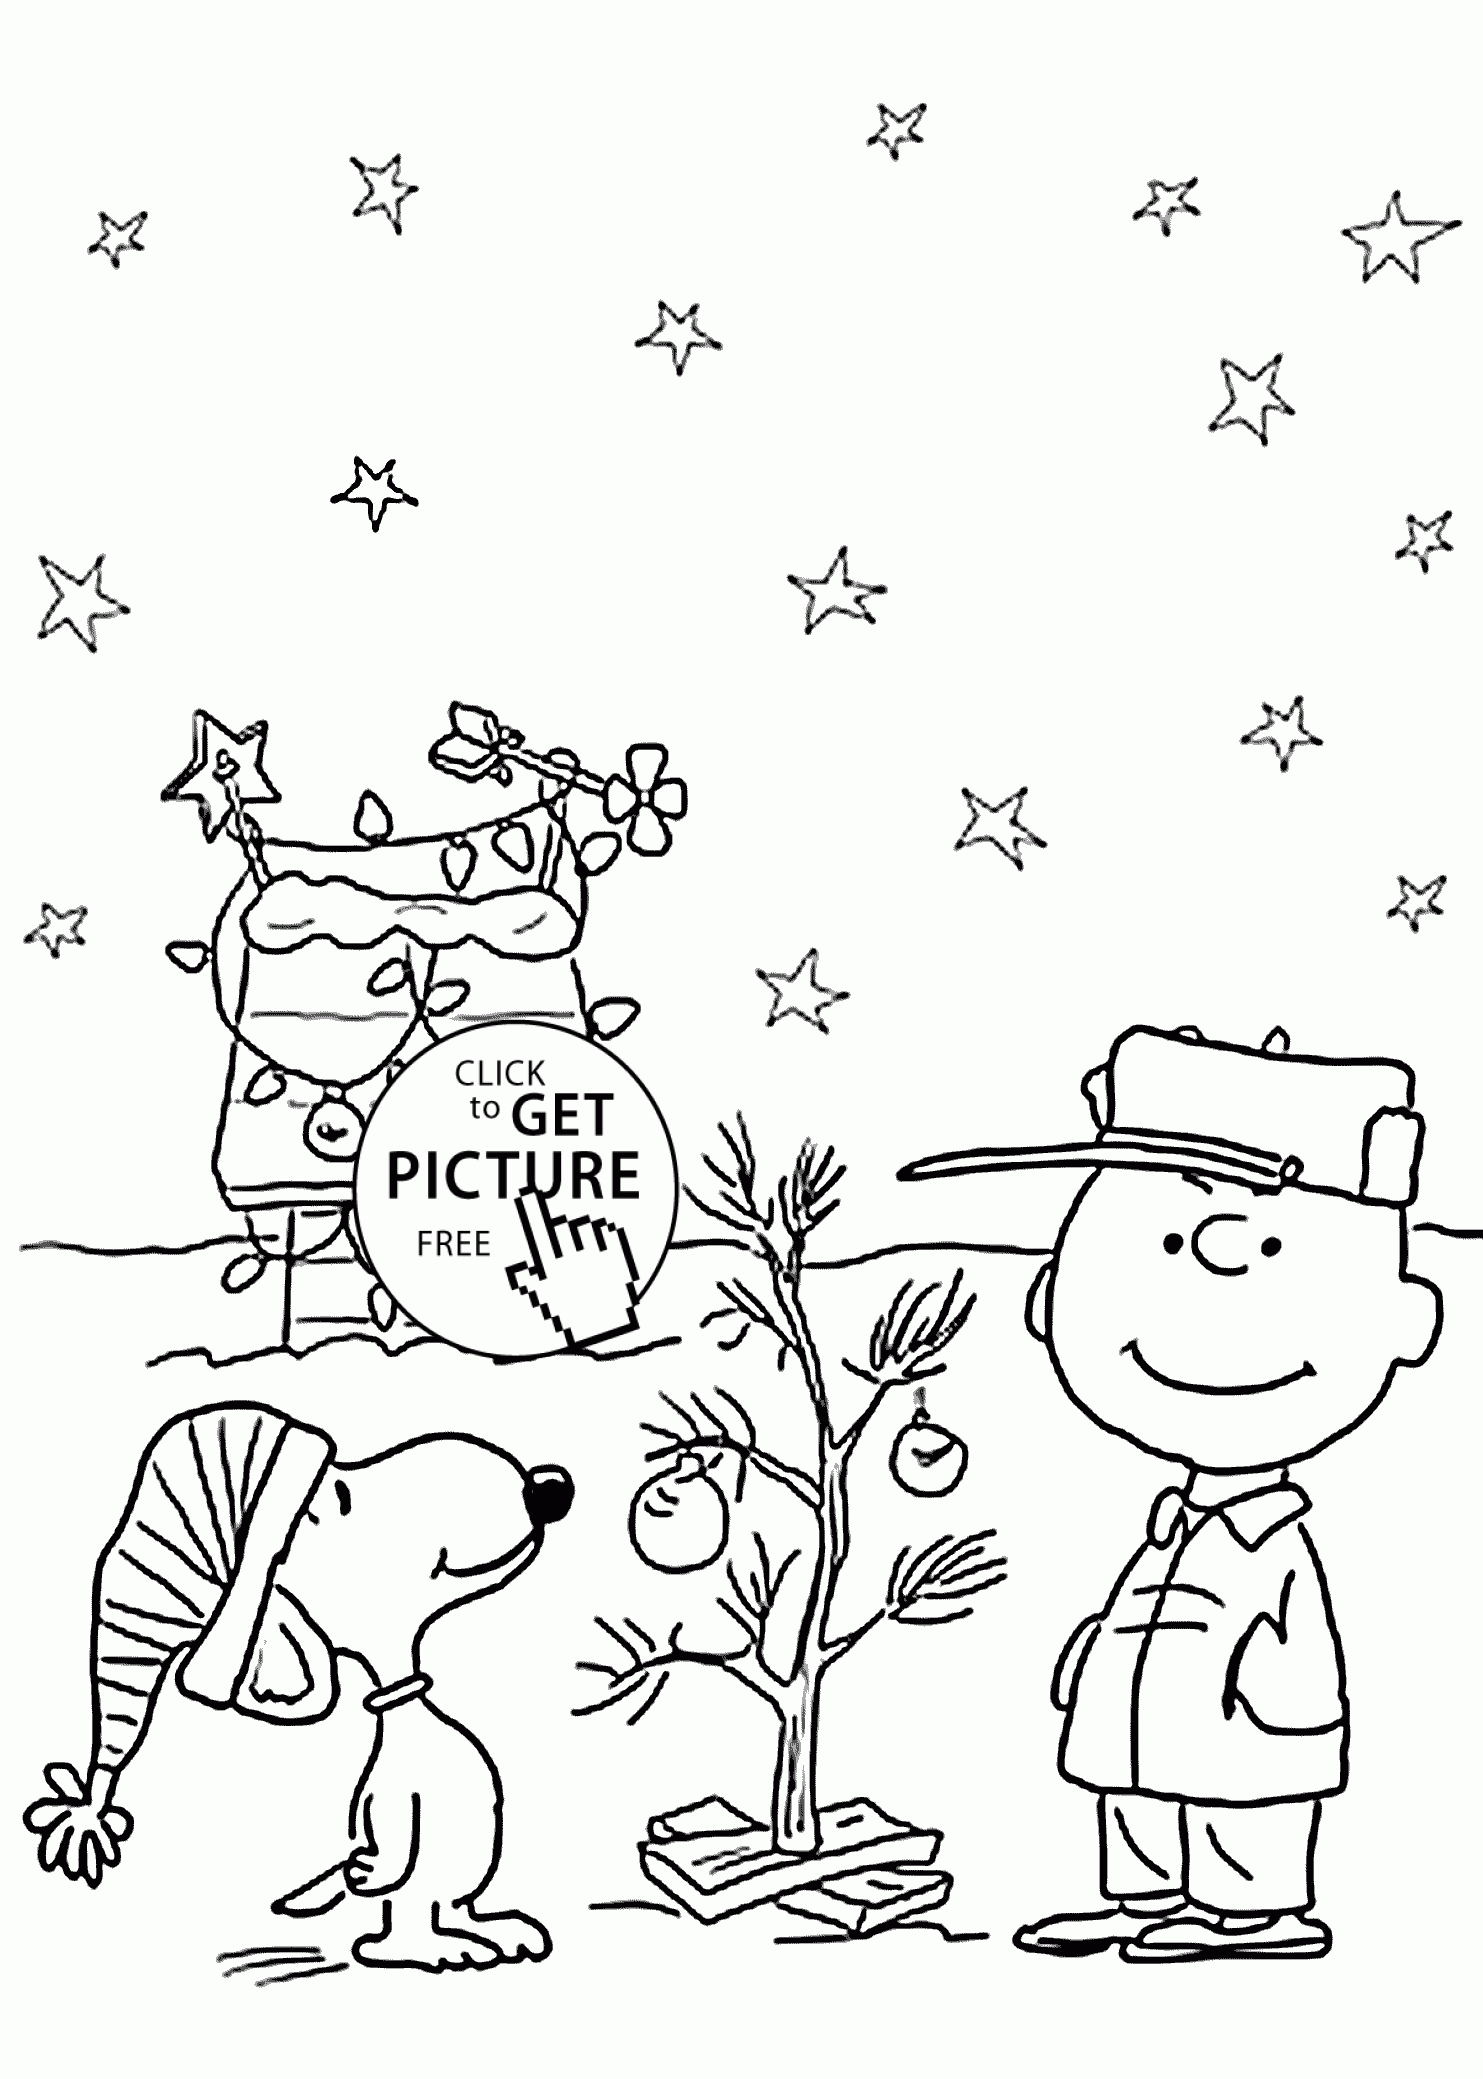 Charlie Brown And Christmas Coloring Pages For Kids, Printable Free - Free Printable Christmas Coloring Pages And Activities